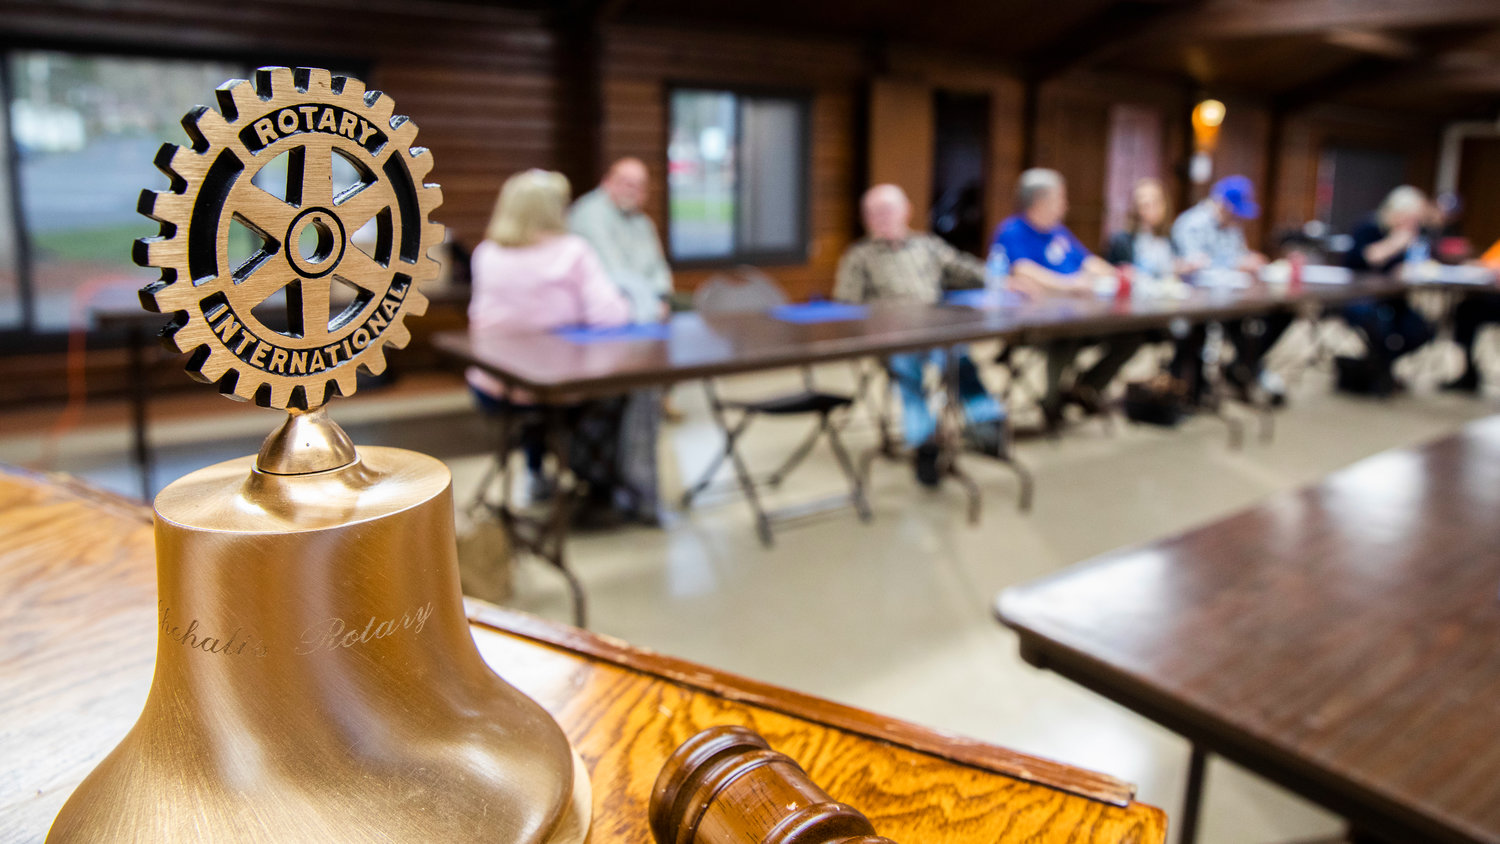 Attendees gather for a Chehalis Rotary Club meeting inside the Virgil R. Lee Community Building in Chehalis on Wednesday.